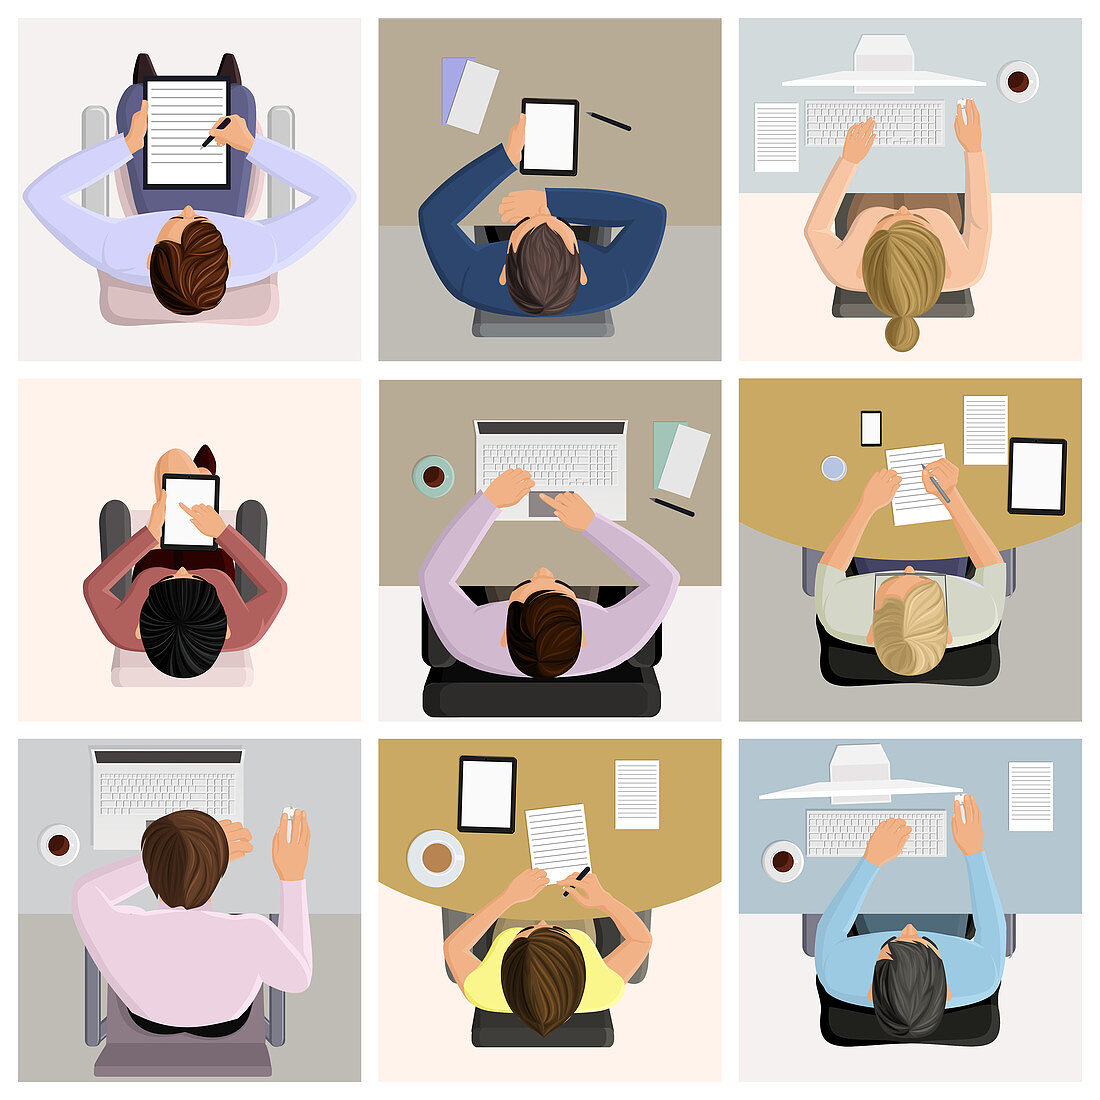 Office workers, illustration